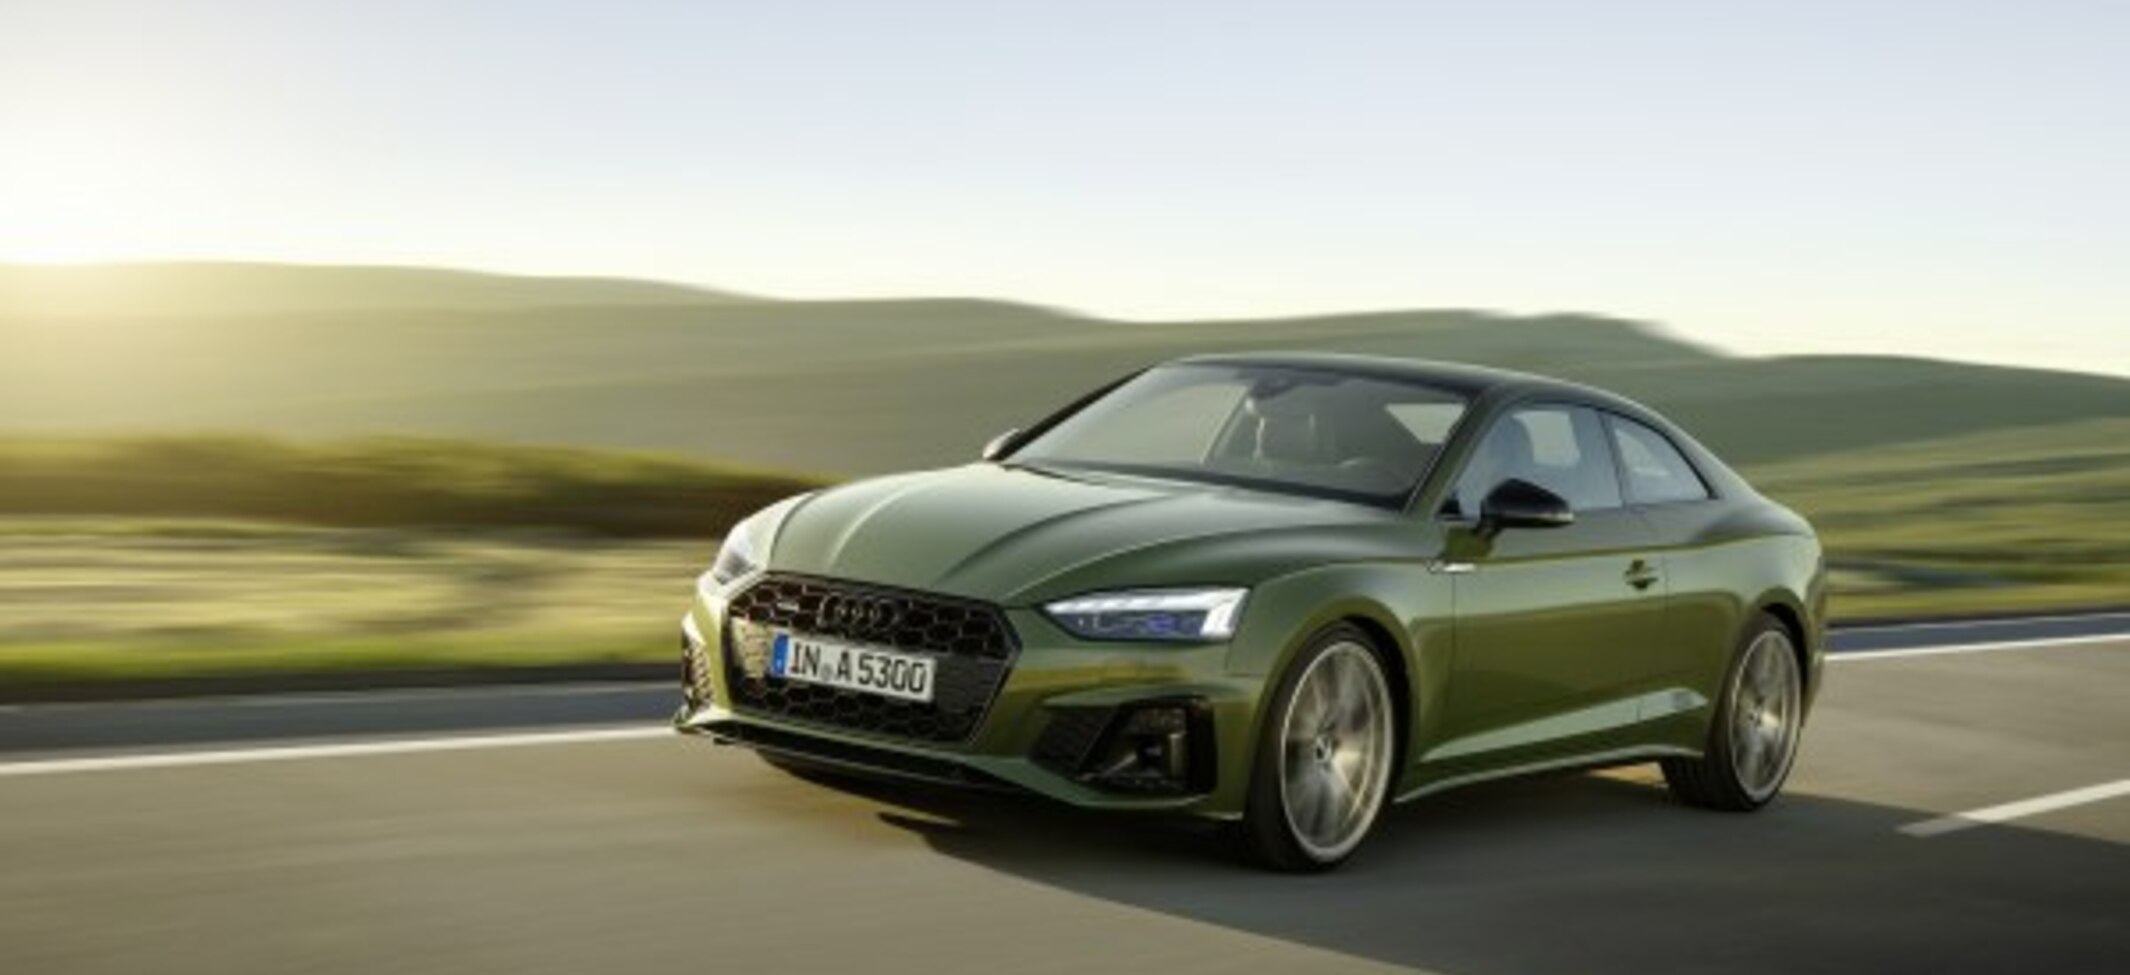 Audi A5 Coupe (F5, facelift 2019) 45 TFSI (245 Hp) quattro ultra S tronic 2019, 2020